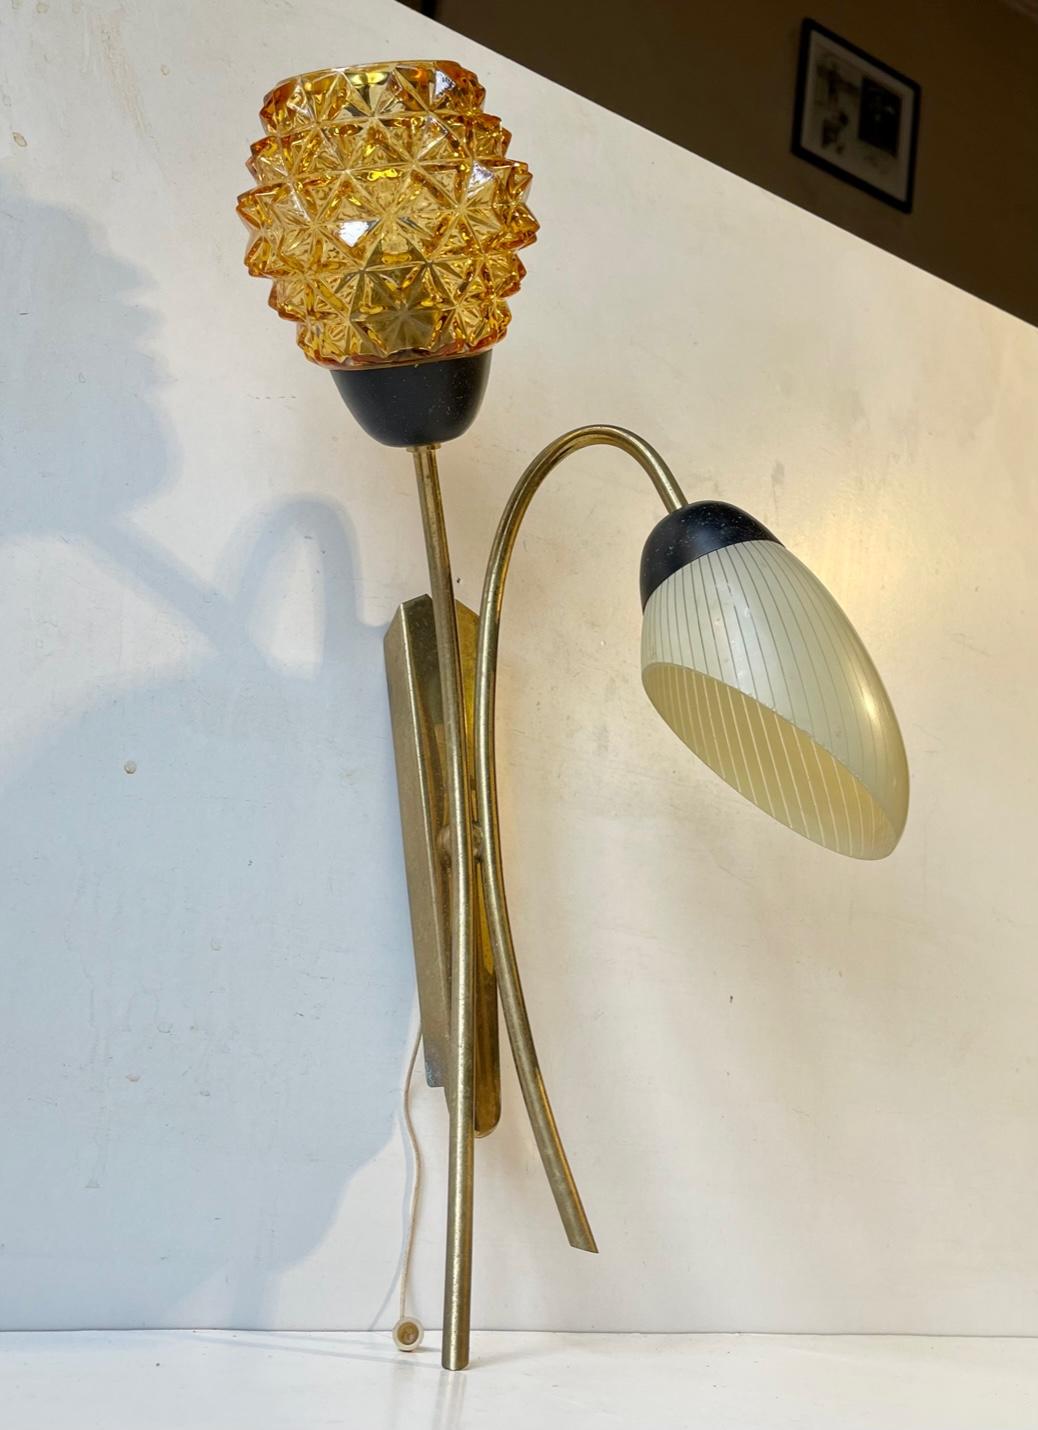 Flower shaped double Sconce designed in a style reminiscent of Stilnovo and manufactured during the 1950s or 60s in Scandinavia. It is made from solid brass and each 'flower' shade is made from glass. One in pressed diamond pattern amber glass and